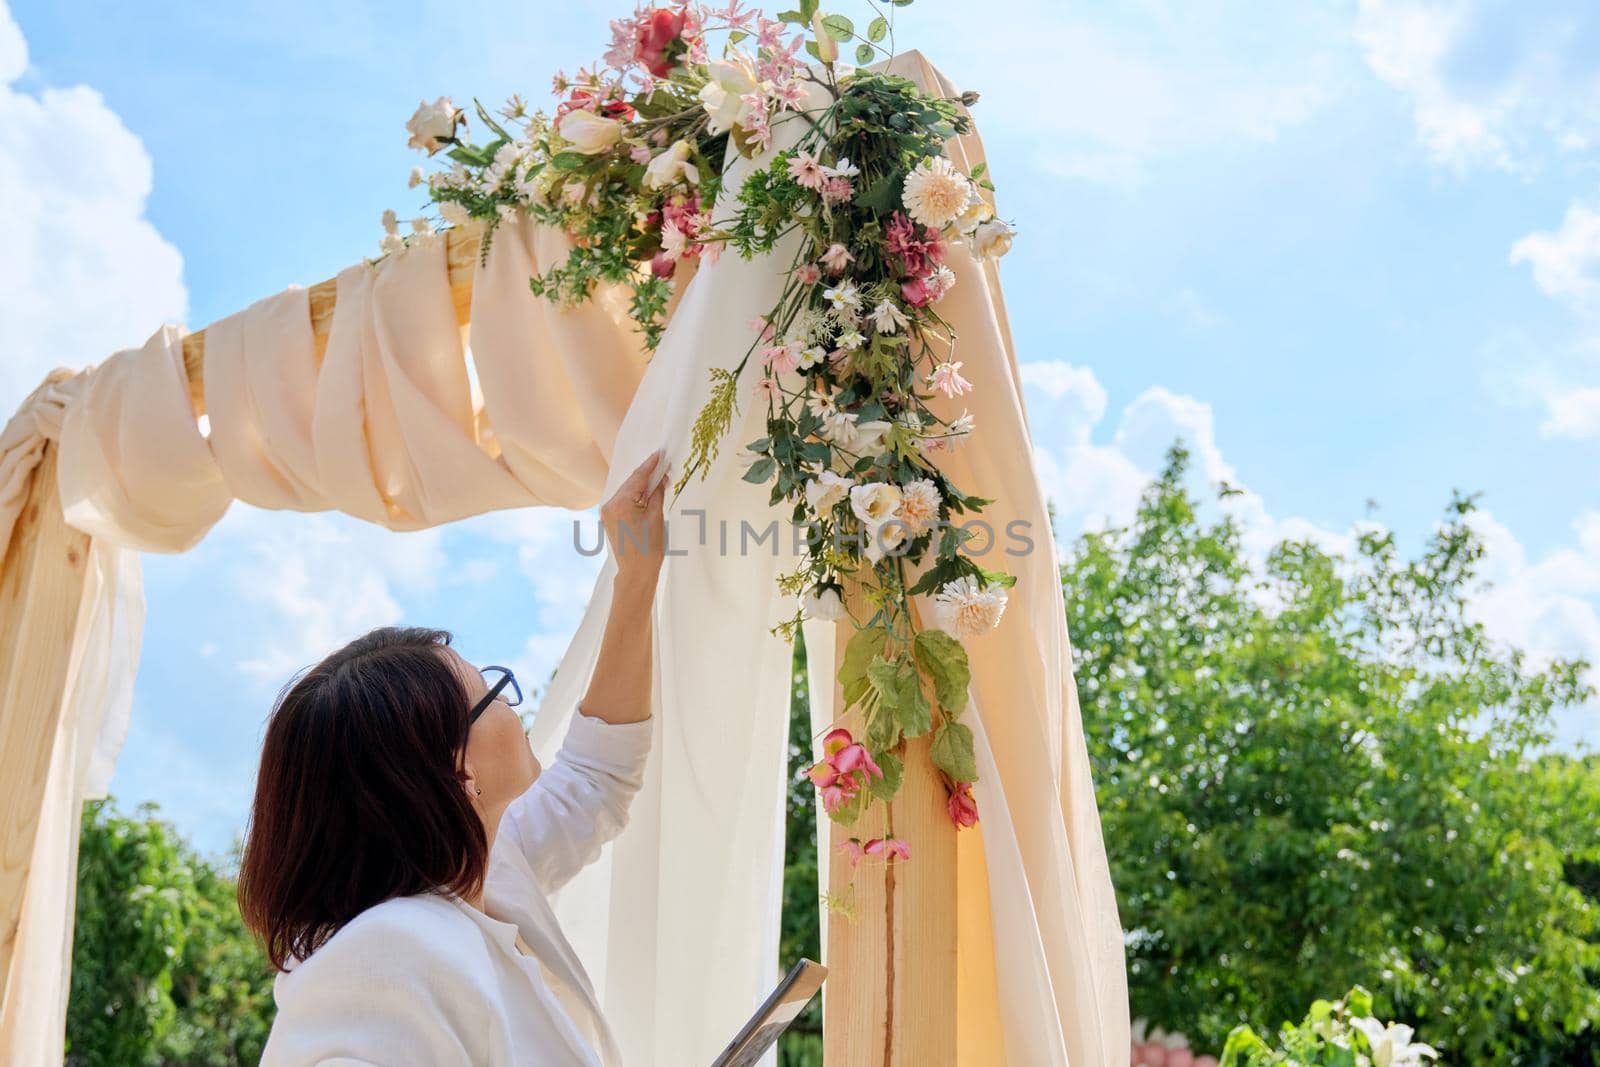 Organization, preparation for holidays, wedding, event. Decorating arch with textiles with flowers and plants. Woman organizer, owner, with digital tablet near wedding arch